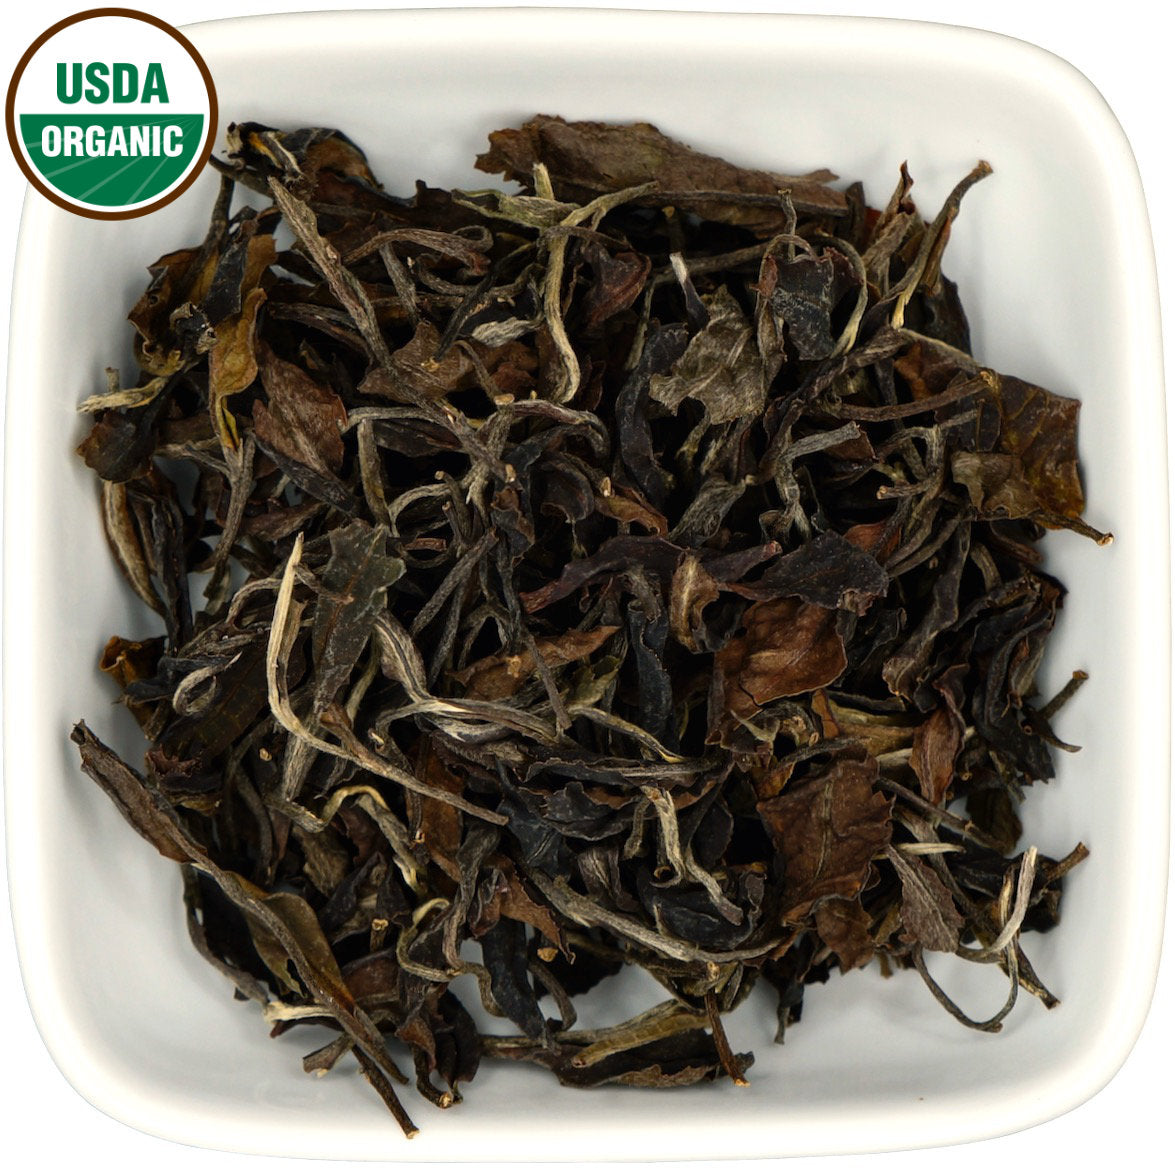 Organic Colombian White Tea dry leaf view